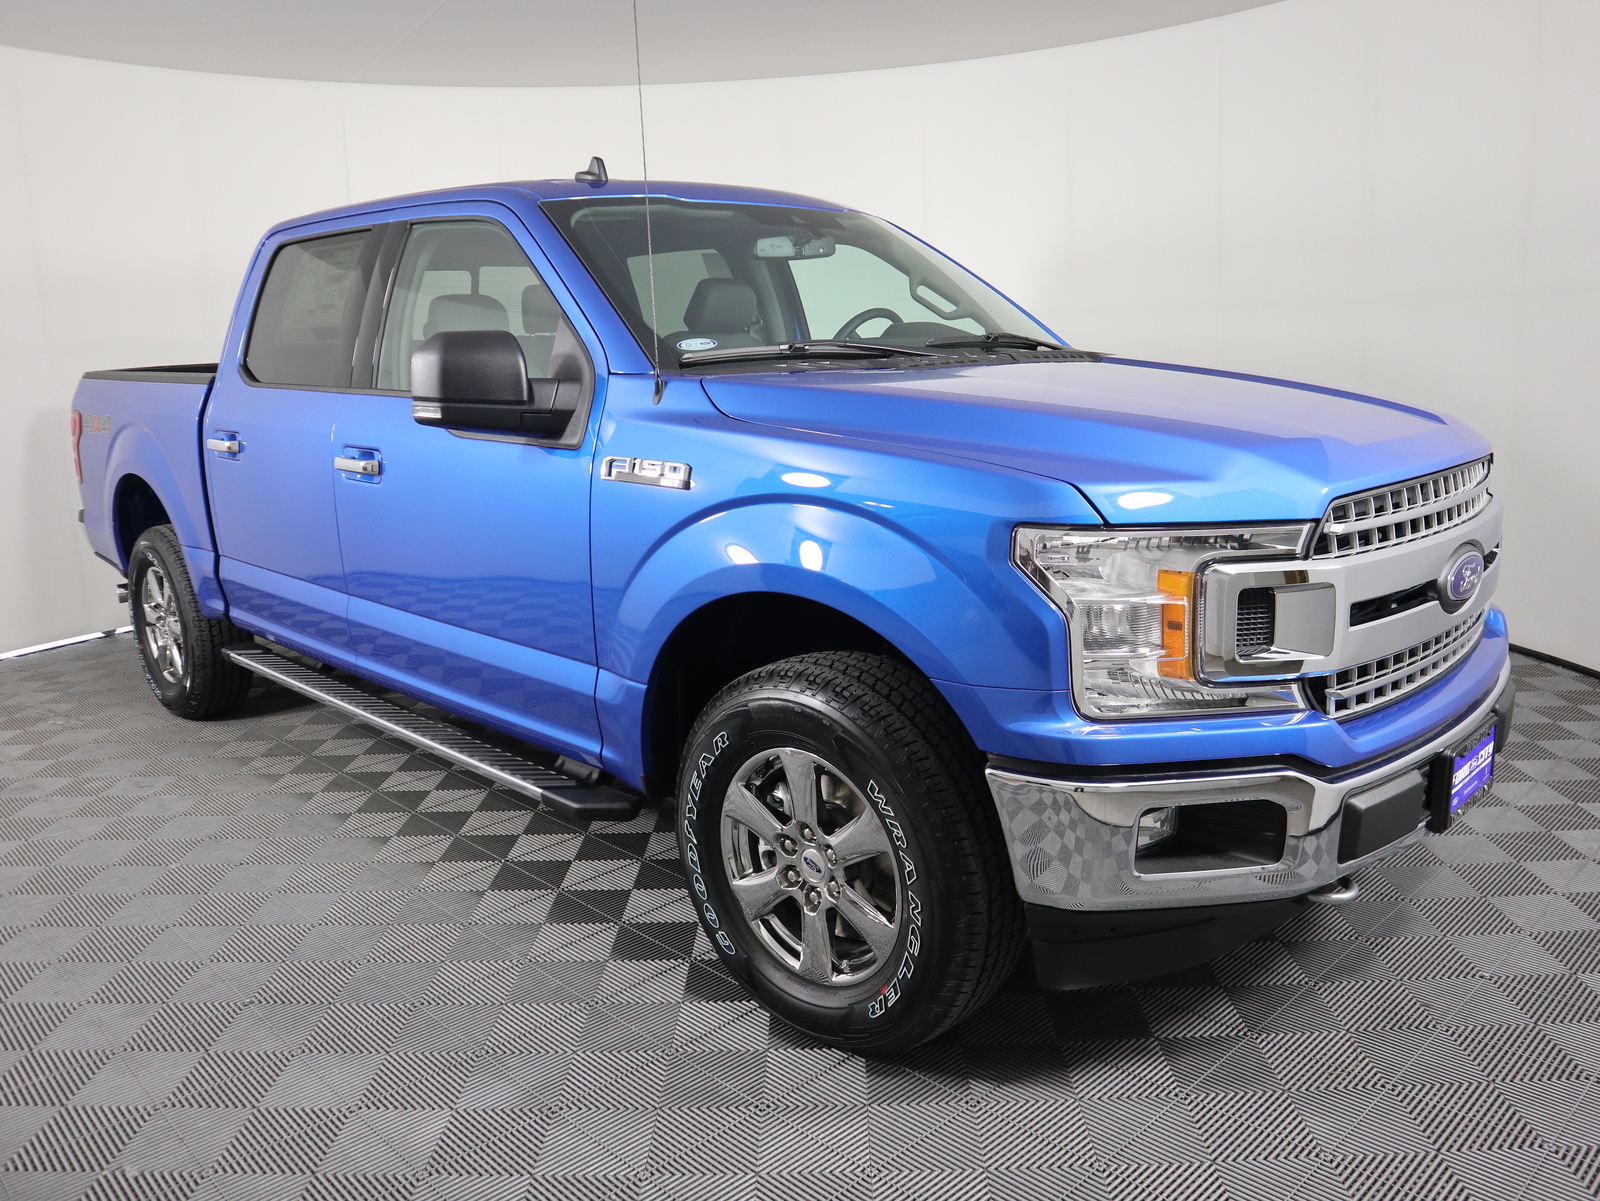 New 2020 Ford F-150 XLT 4WD SuperCrew 5.5' Box Crew Cab Pickup in Savoy 2020 F 150 Xlt 4x4 Towing Capacity